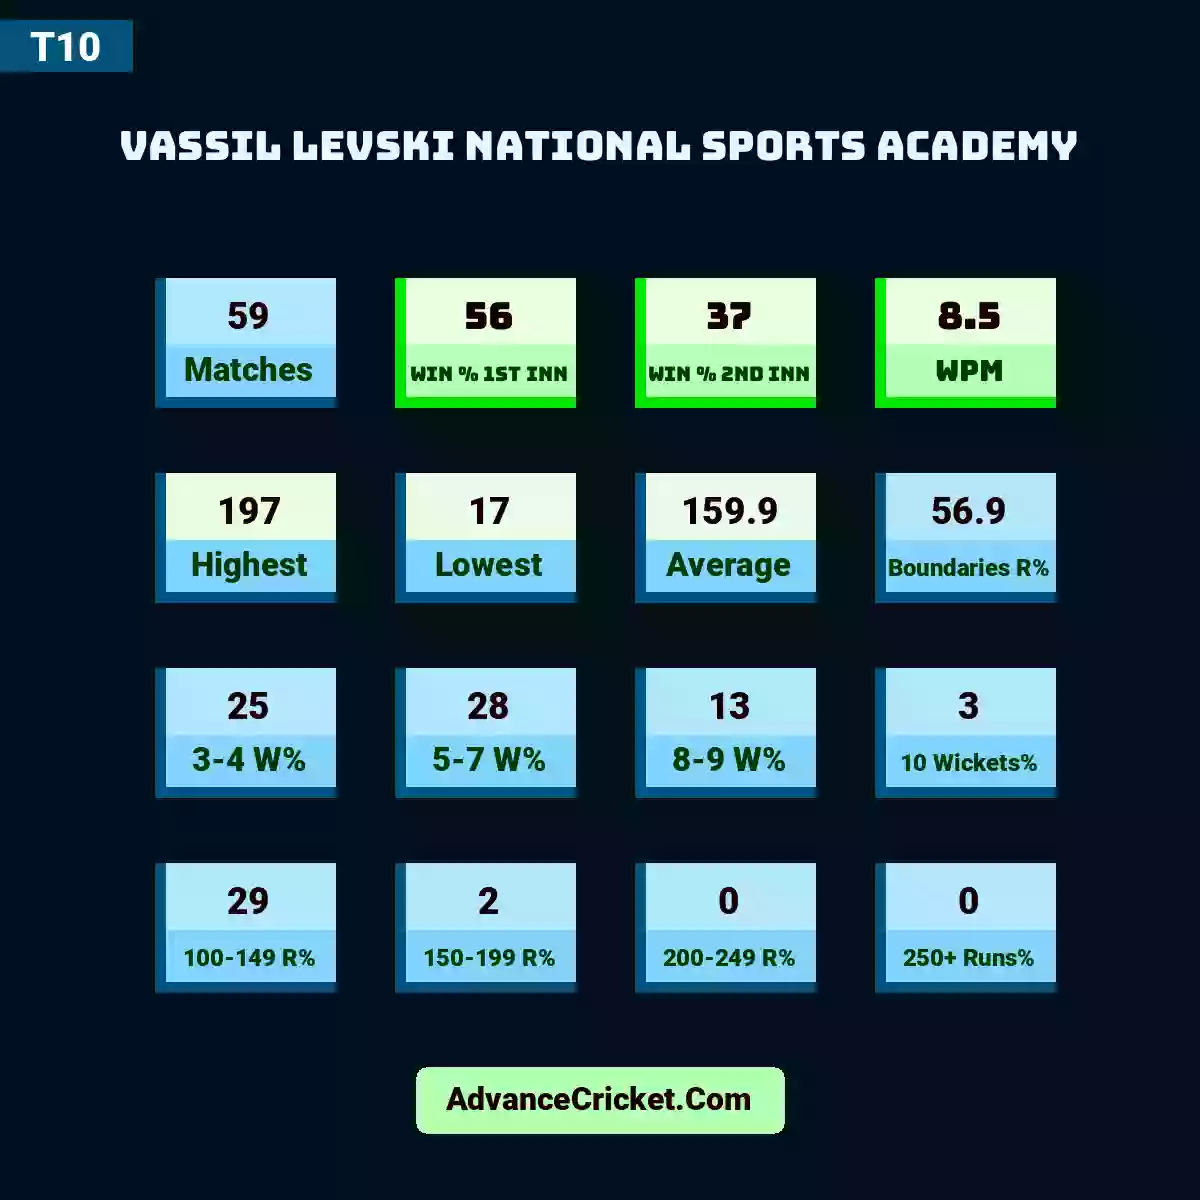 Image showing Vassil Levski National Sports Academy with Matches: 59, Win % 1st Inn: 56, Win % 2nd Inn: 37, WPM: 8.5, Highest: 197, Lowest: 17, Average: 159.9, Boundaries R%: 56.9, 3-4 W%: 25, 5-7 W%: 28, 8-9 W%: 13, 10 Wickets%: 3, 100-149 R%: 29, 150-199 R%: 2, 200-249 R%: 0, 250+ Runs%: 0.